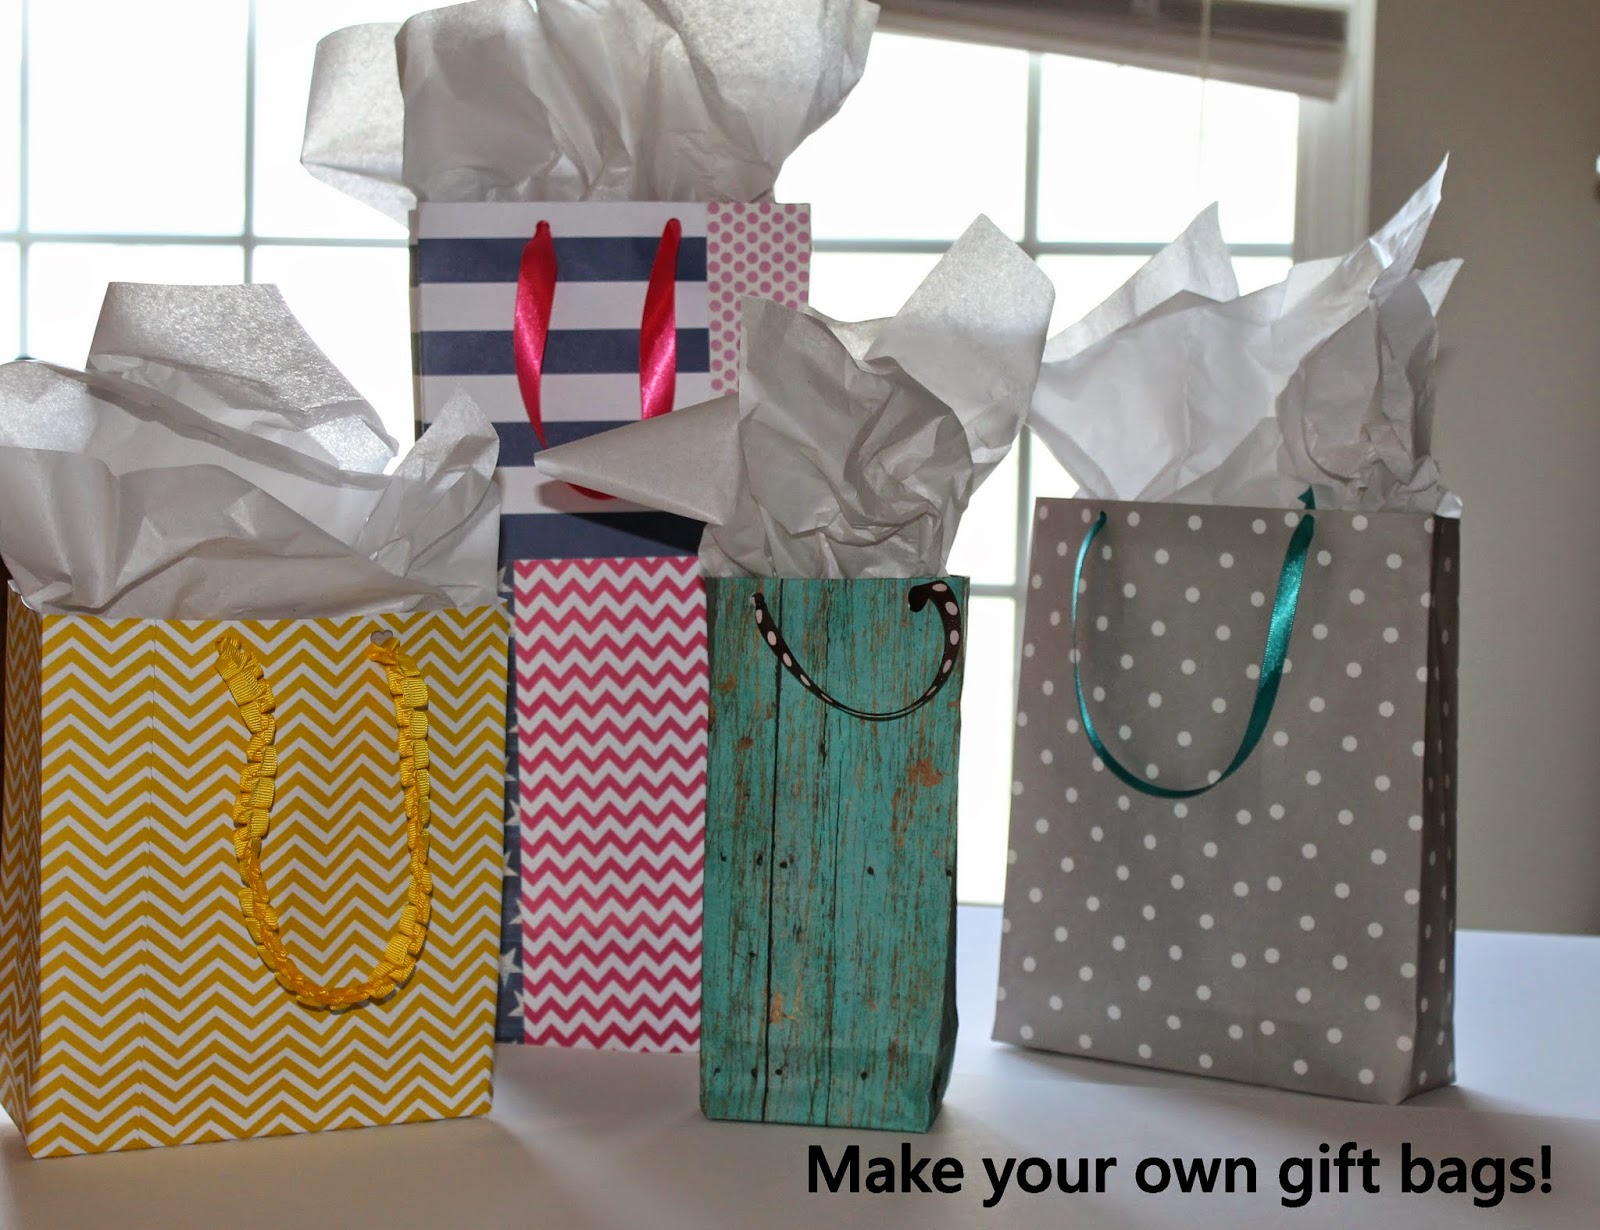 1. I love that I can customize gift bags - they make some crazy cute ...